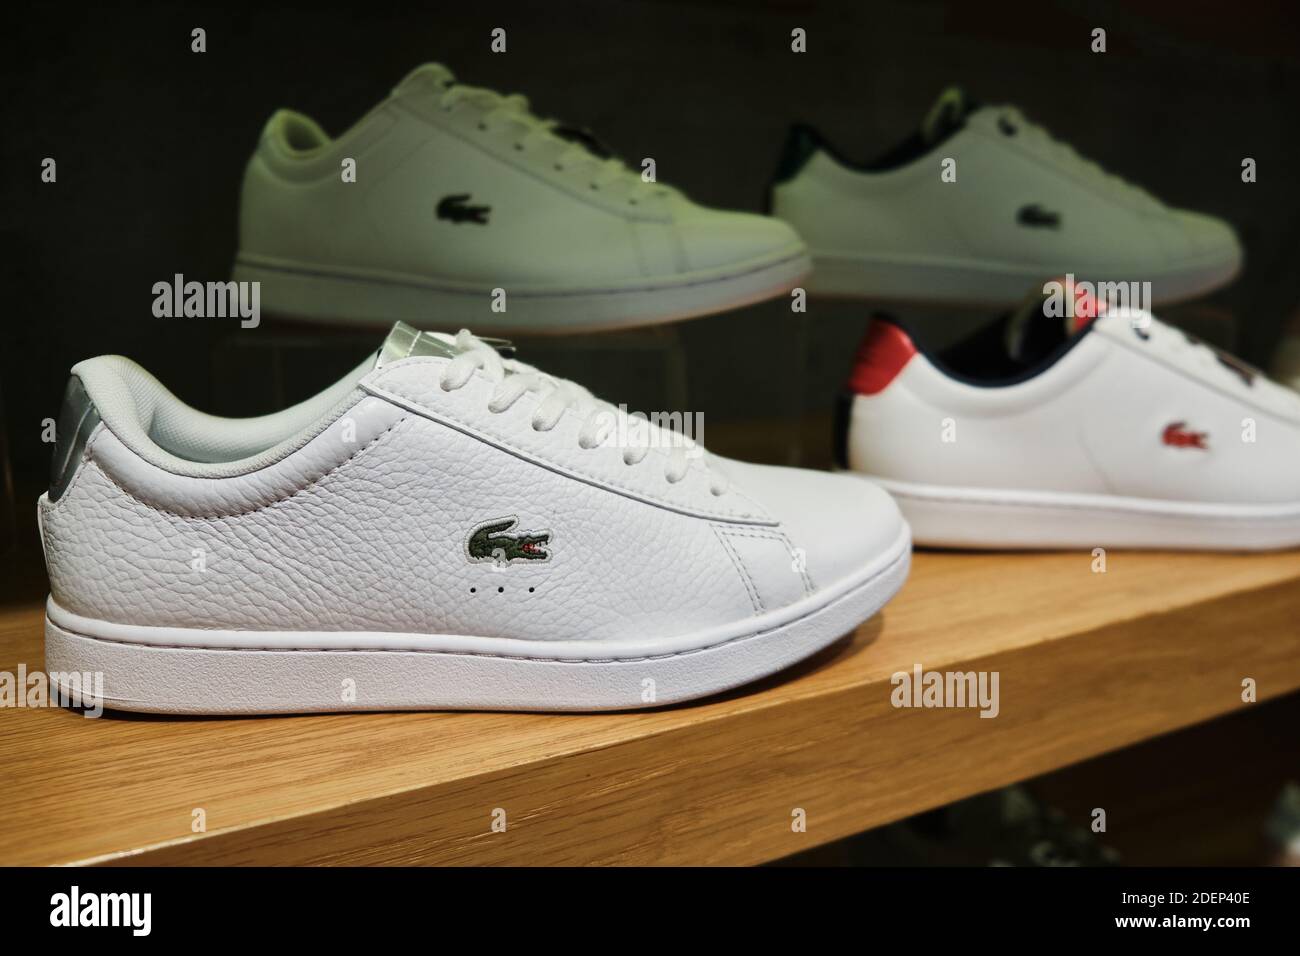 Lacoste Collection High Resolution Stock Photography and Images - Alamy